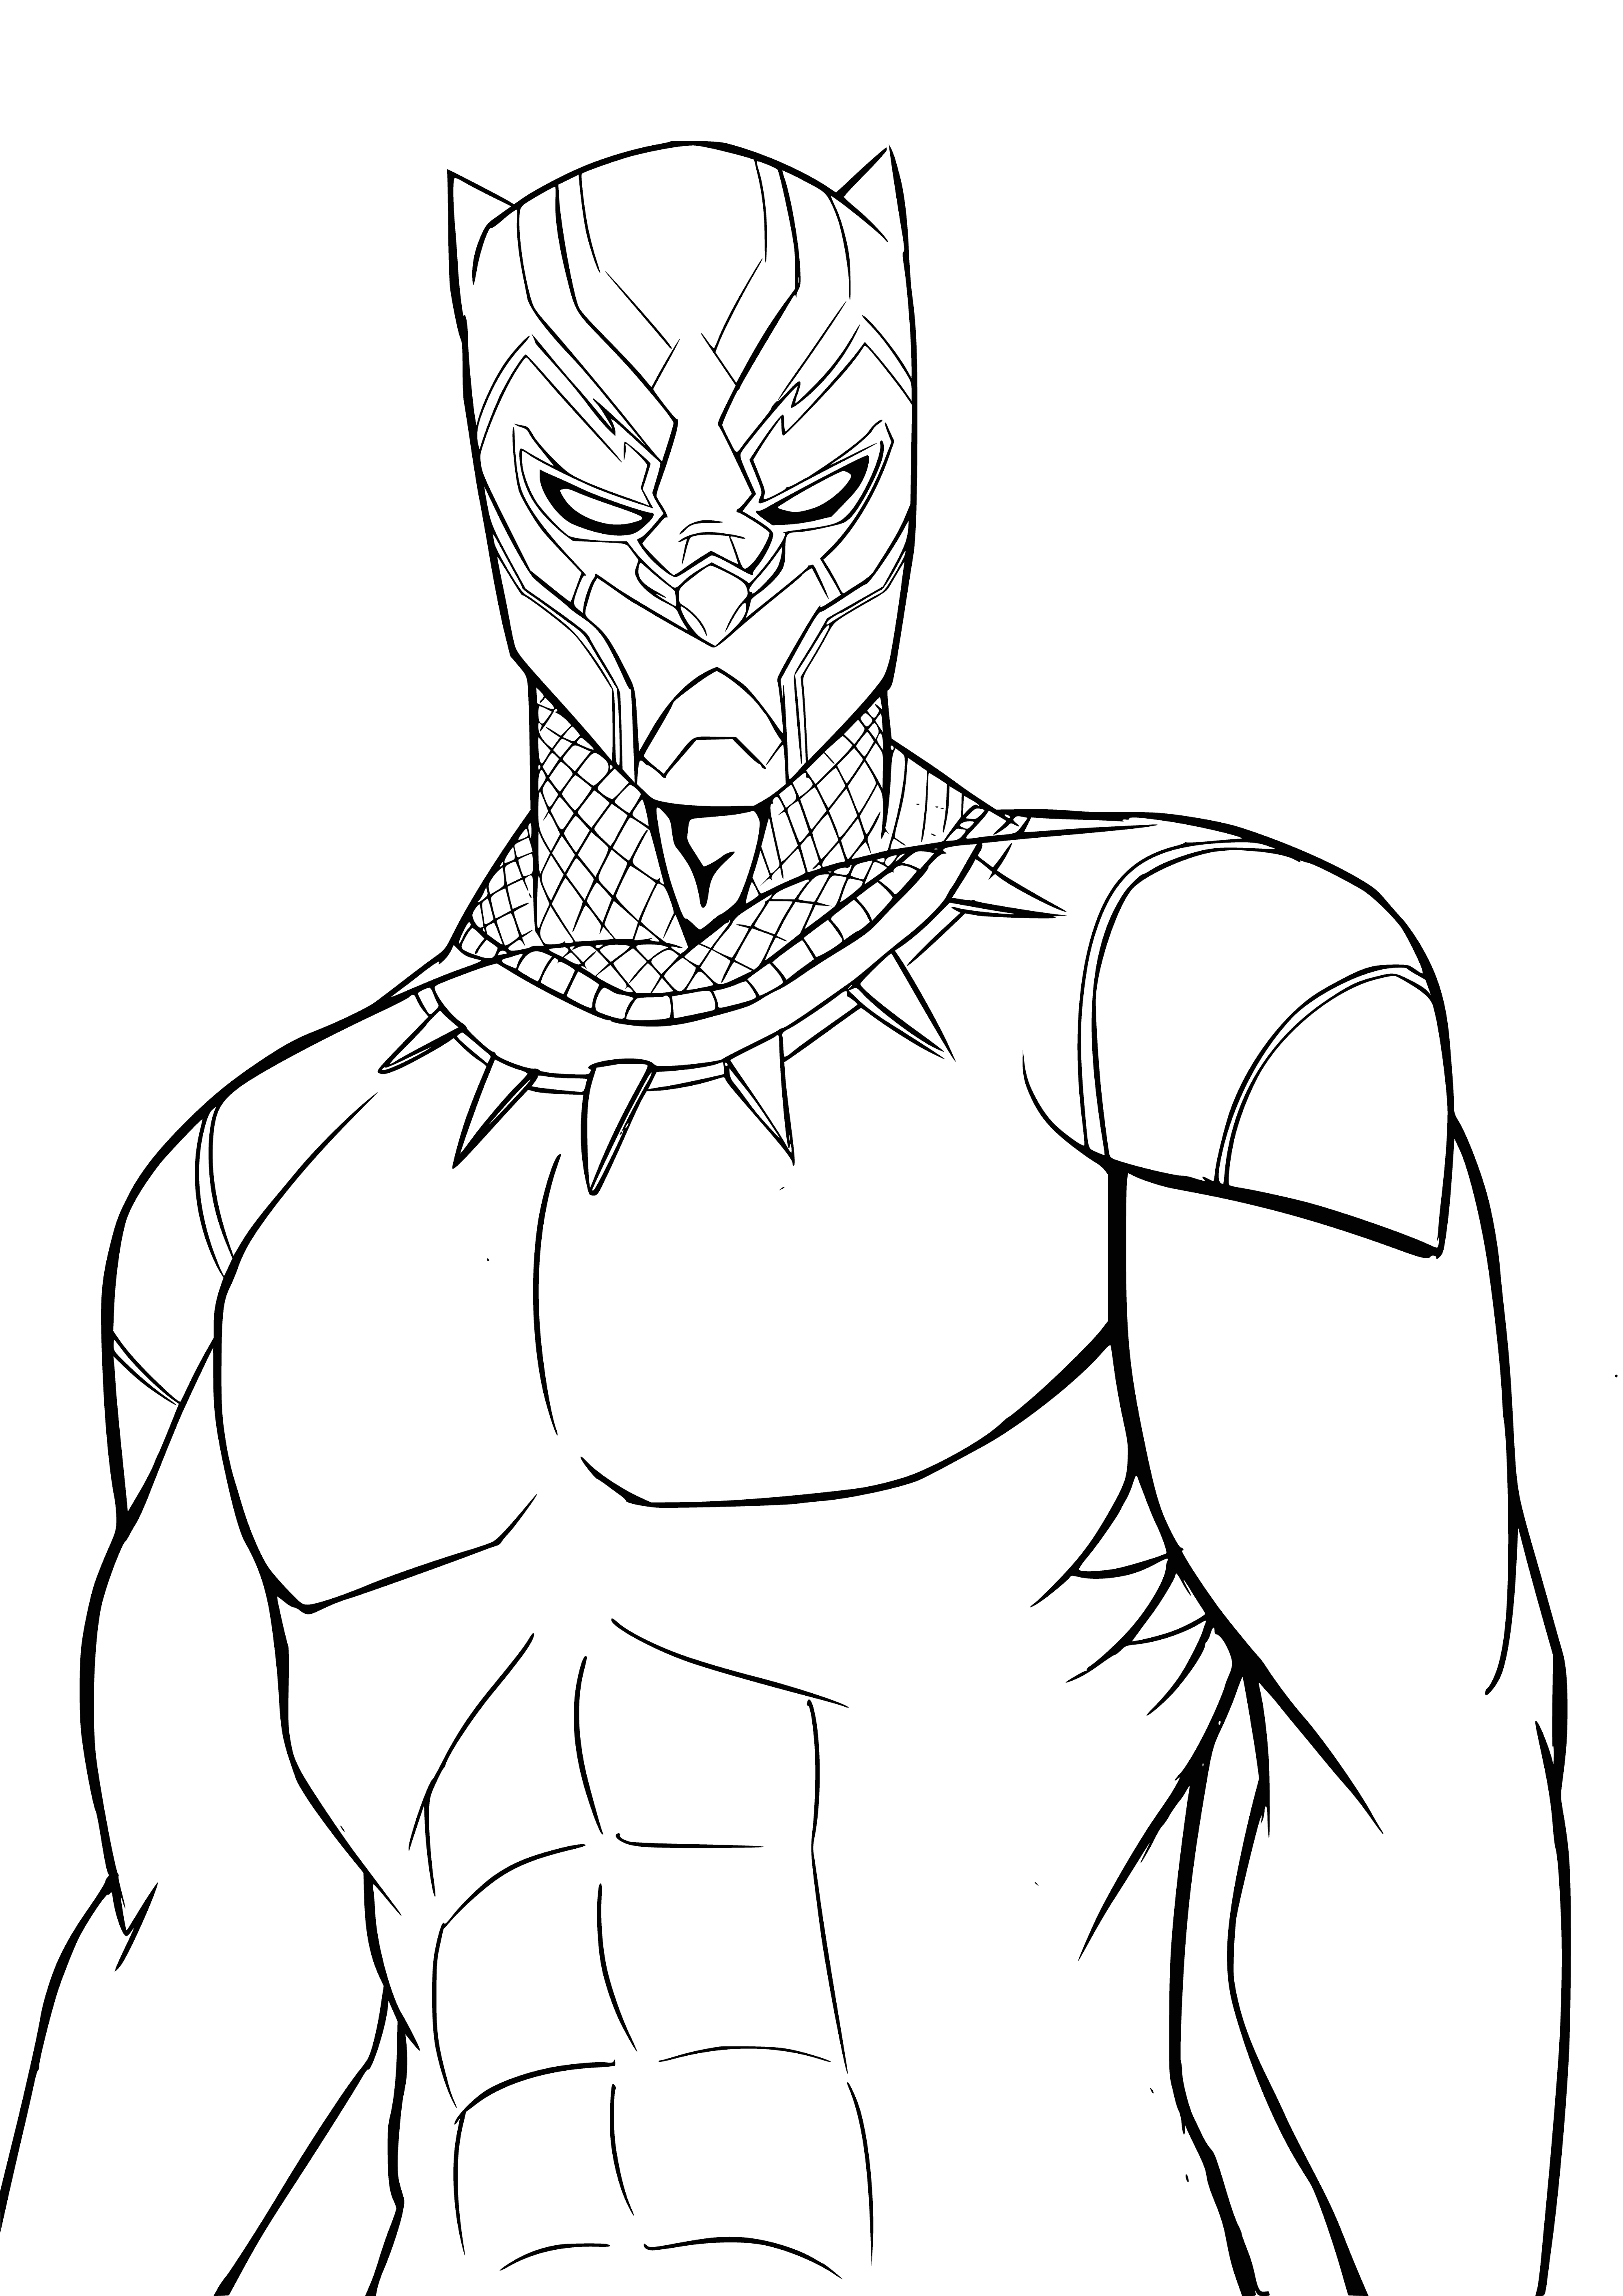 coloring page: The Avengers stand ready to protect their city from a threatening black panther, whose power is shown by glowing eyes, sharp teeth and sleek muscles.